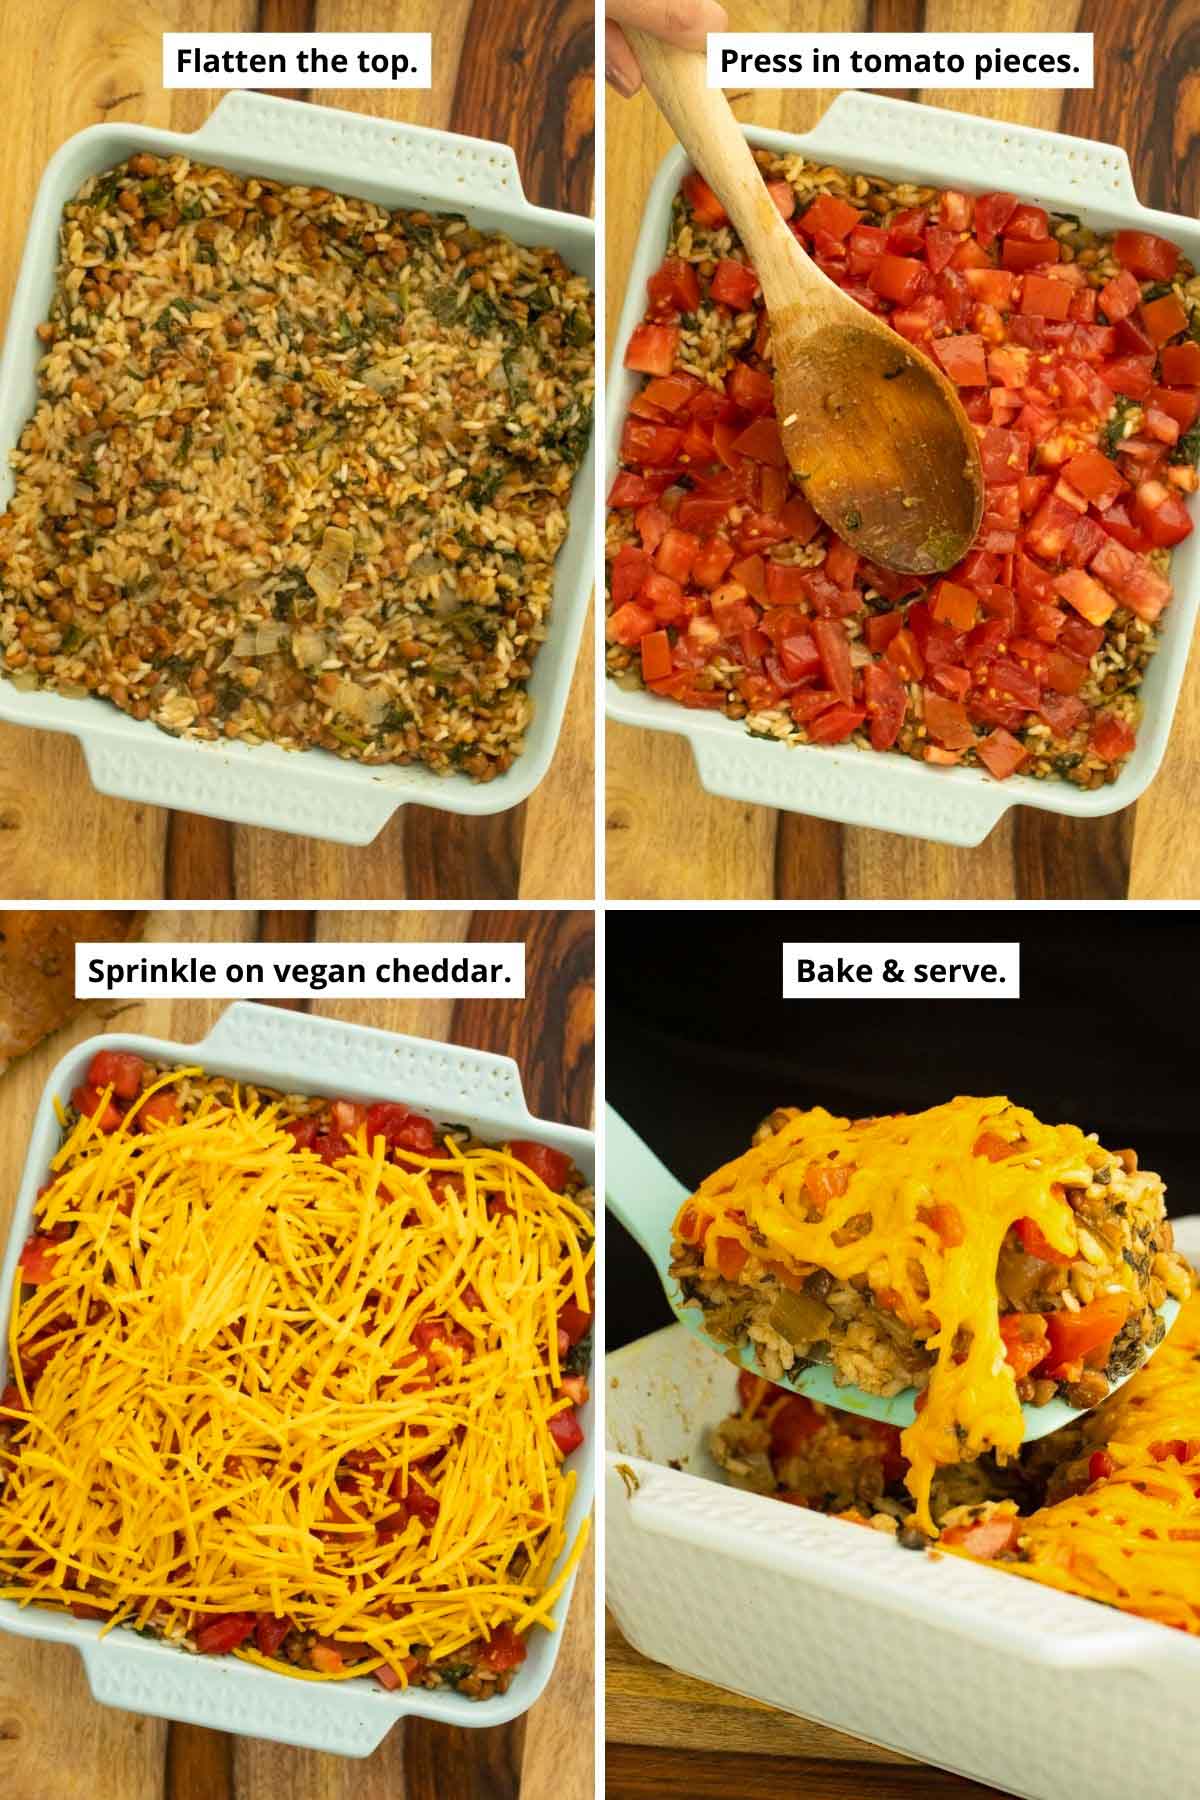 image collage showing the rice mixture in the baking pan after flattening, pressing the tomatoes into the top, adding the vegan cheese shreds, and serving the rice casserole after baking